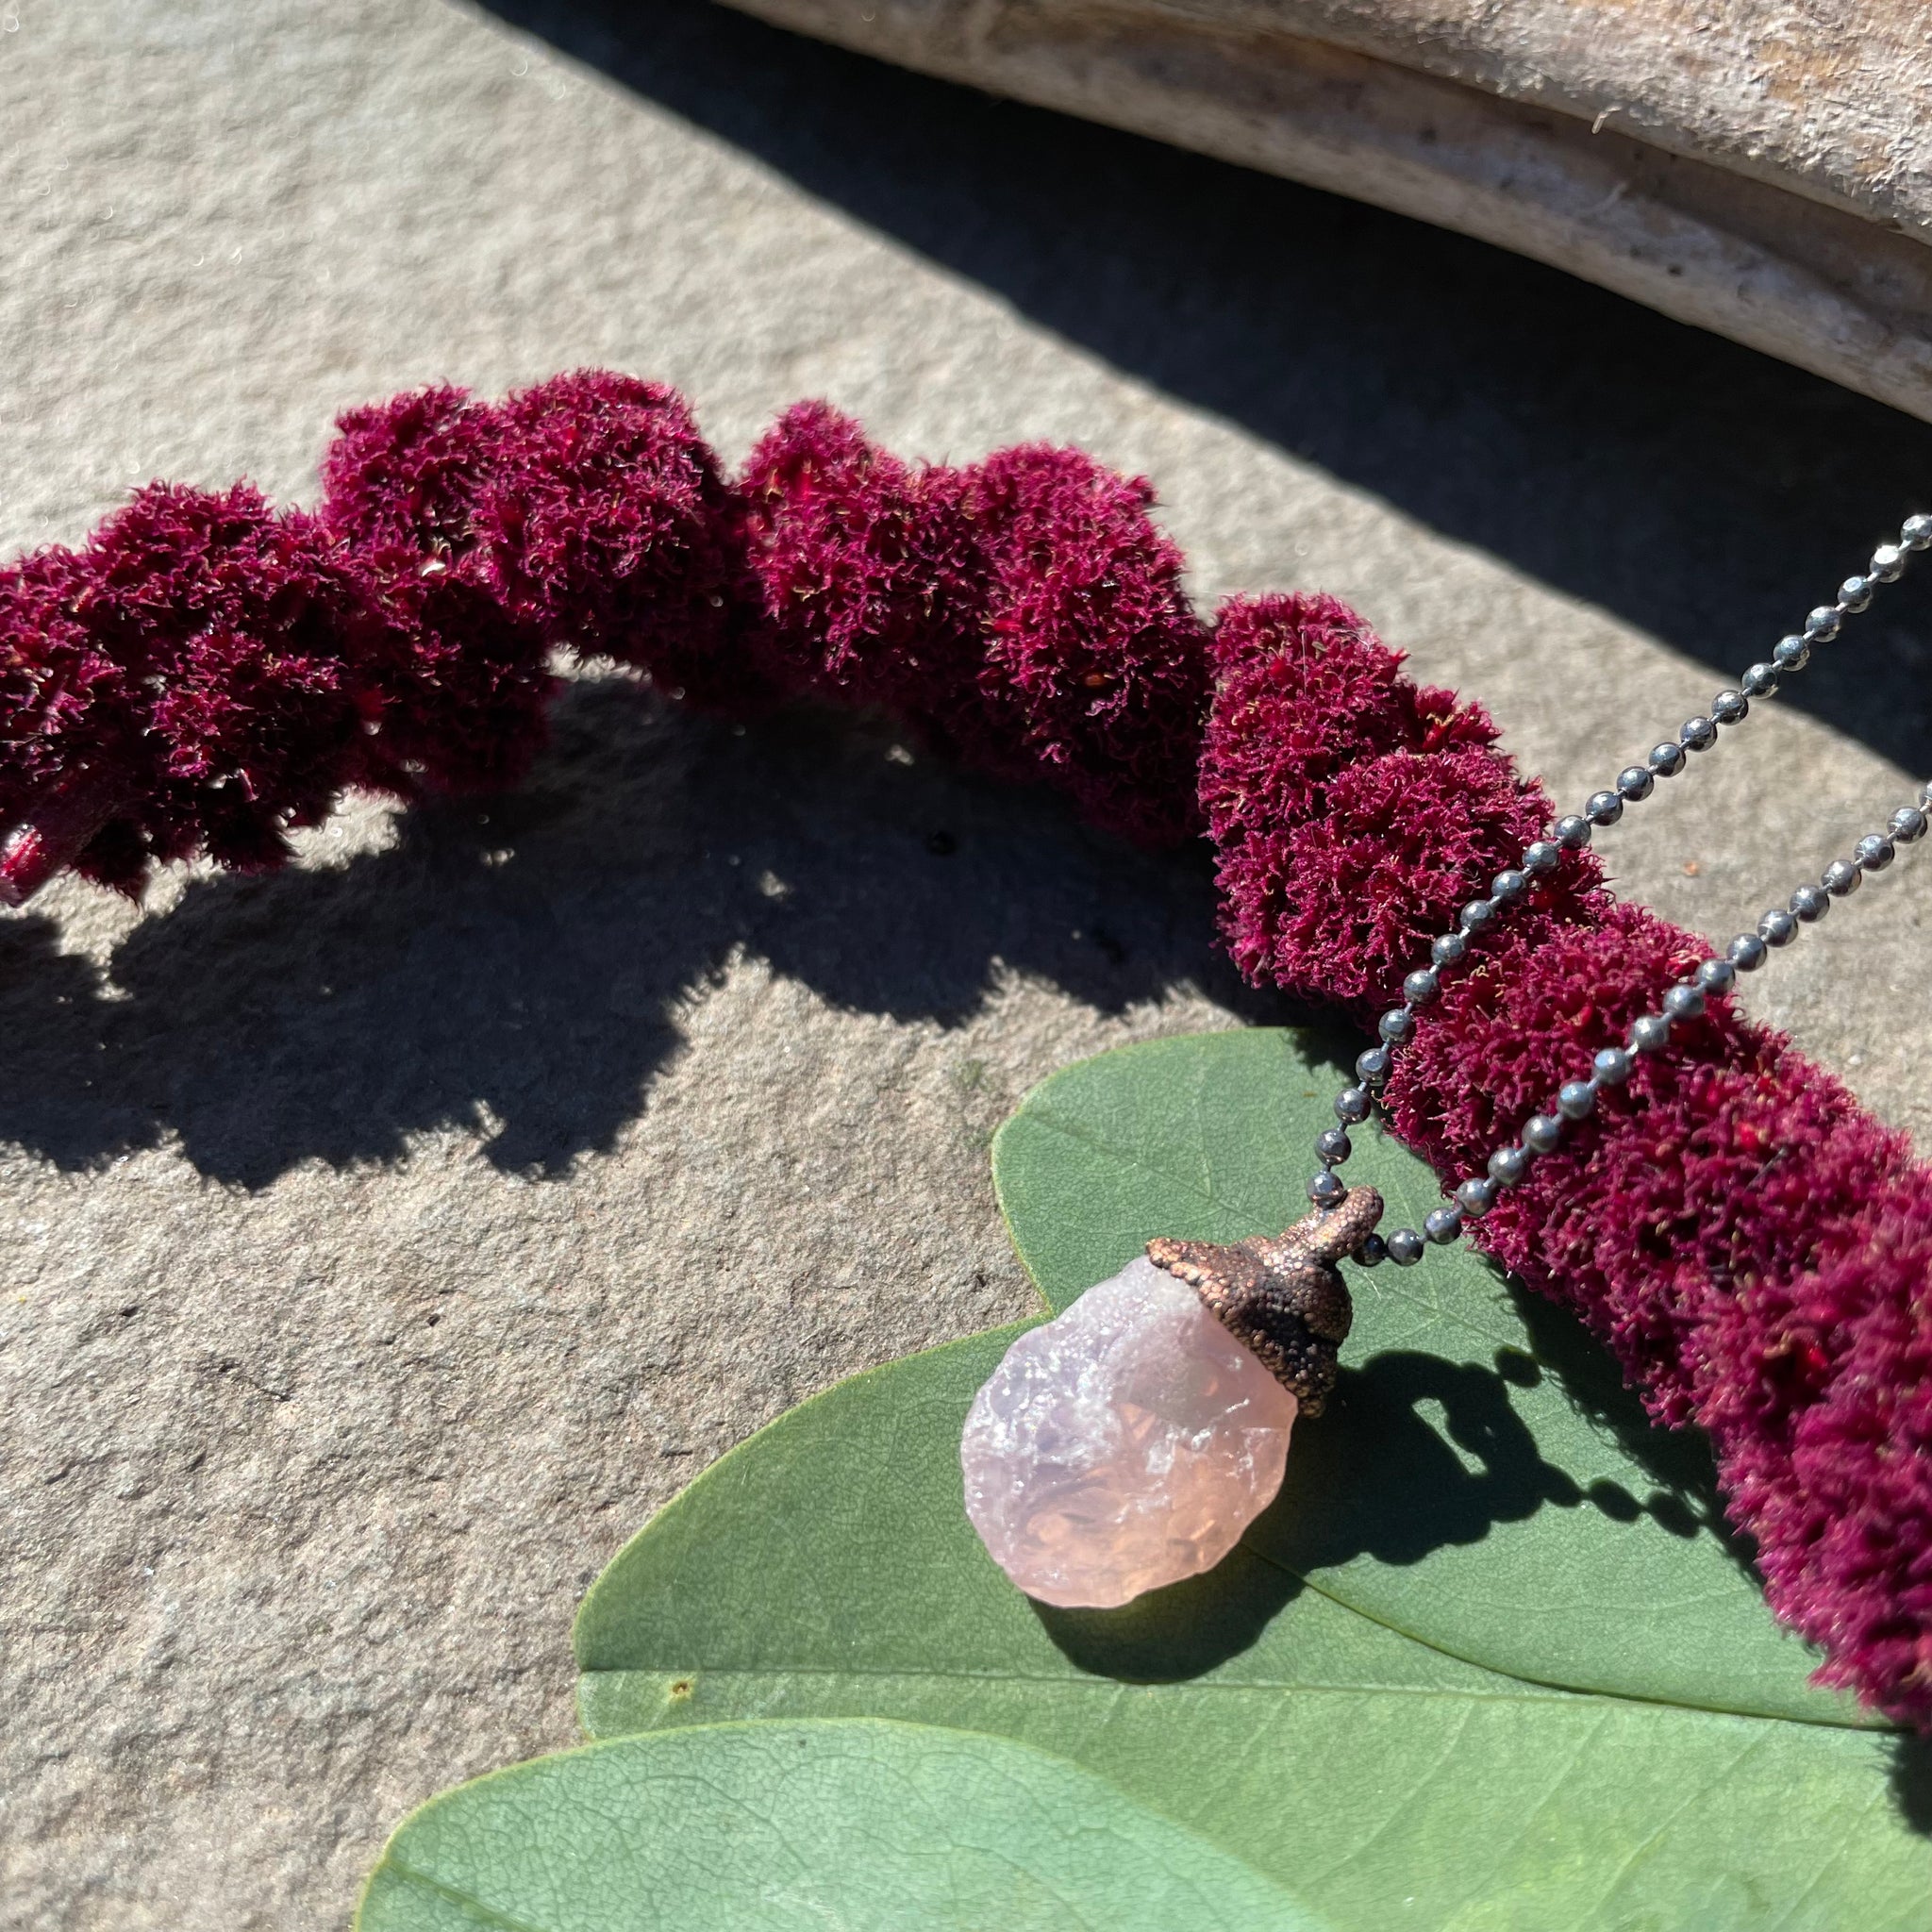 Raw Rose Quartz on 18” Sterling Necklace by Hawkhouse